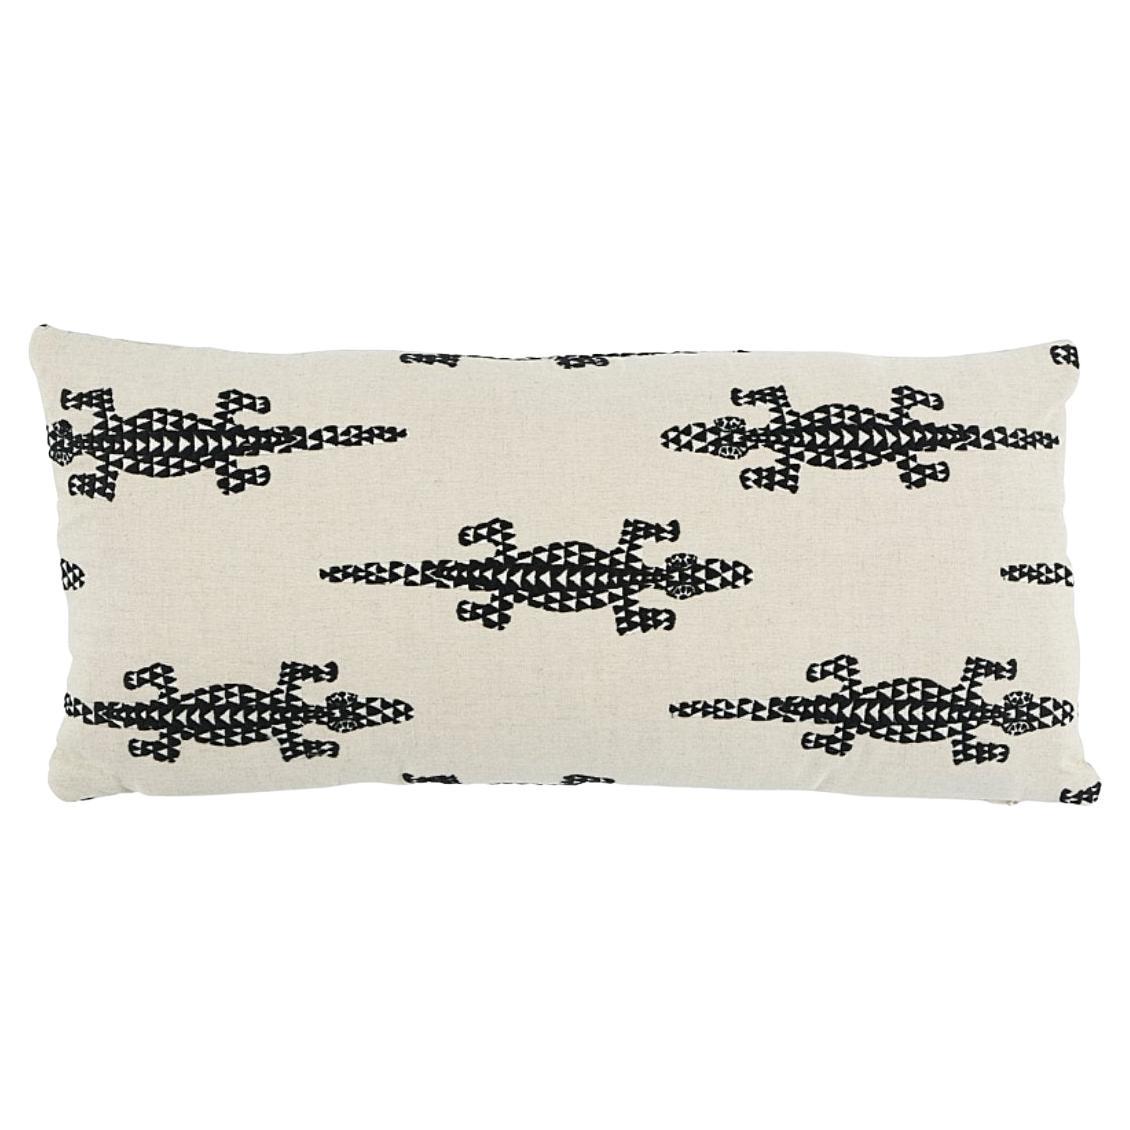 Schumacher Baracoa Embroidery Pillow In Black For Sale